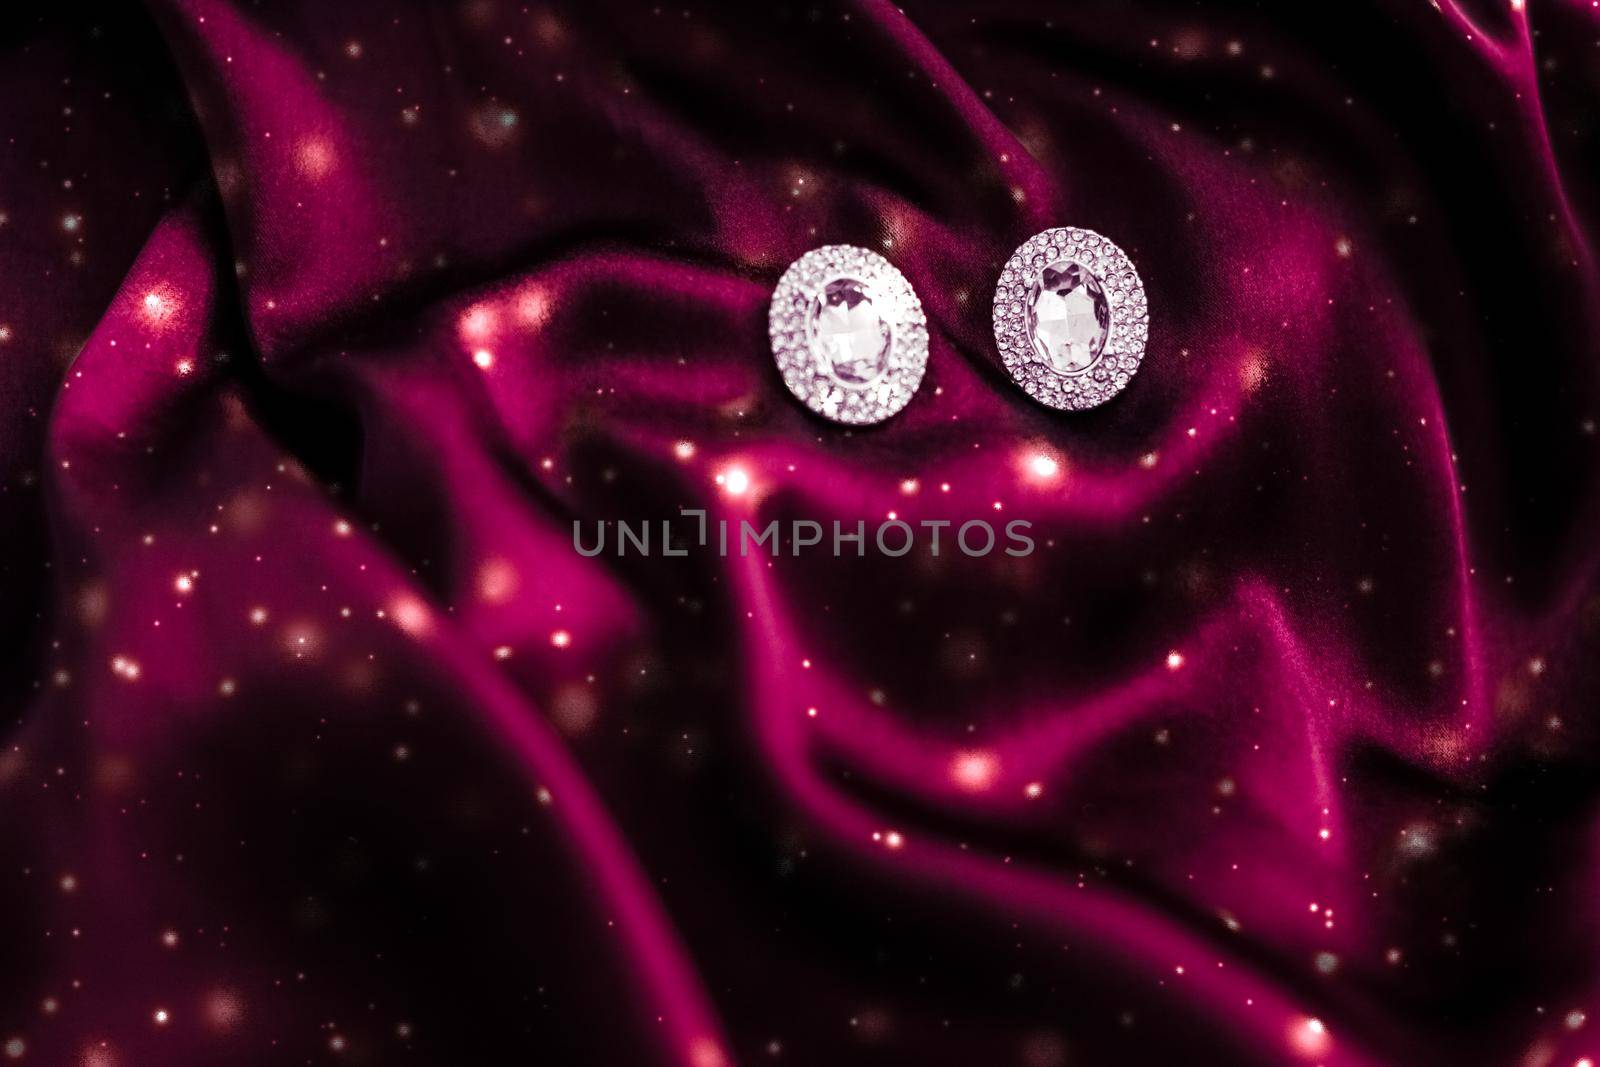 Jewellery brand, Christmas shopping and New Years gift concept - Luxury diamond earrings on dark red silk with snow glitter, holiday winter magic jewelery present